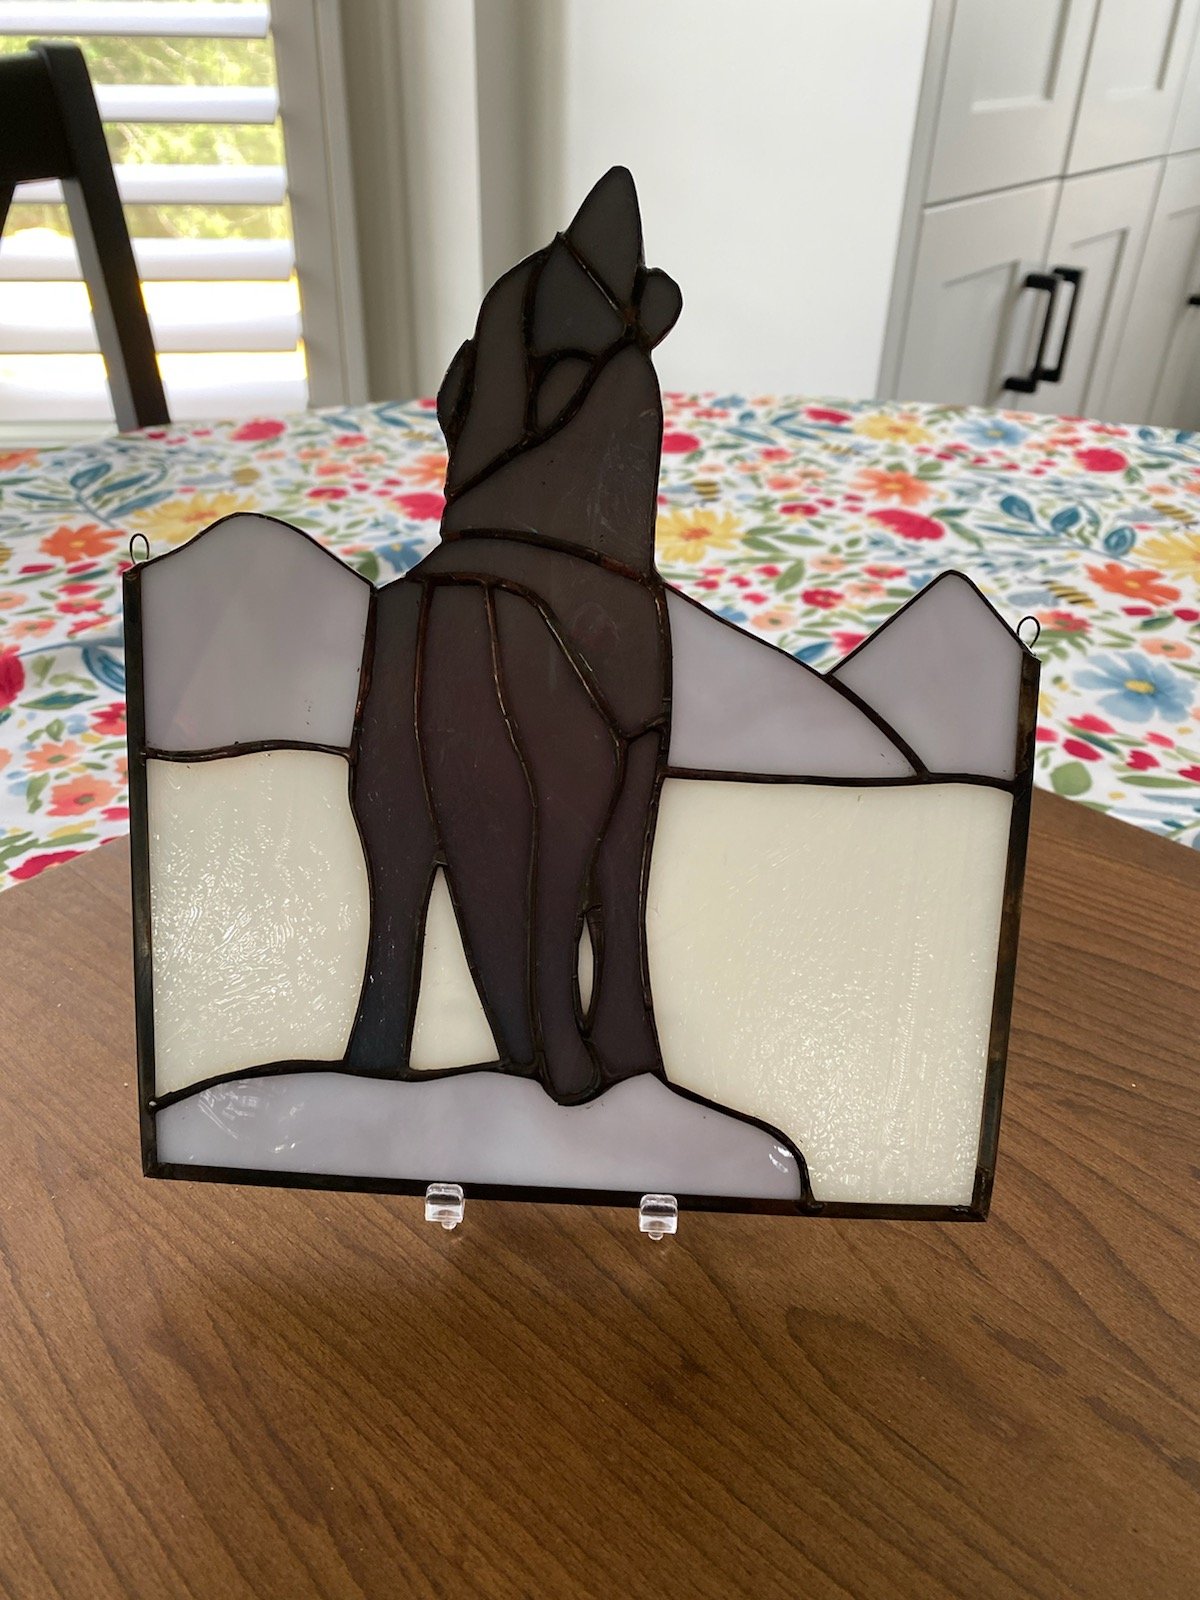 Shop — Cutting Edge Stained Glass